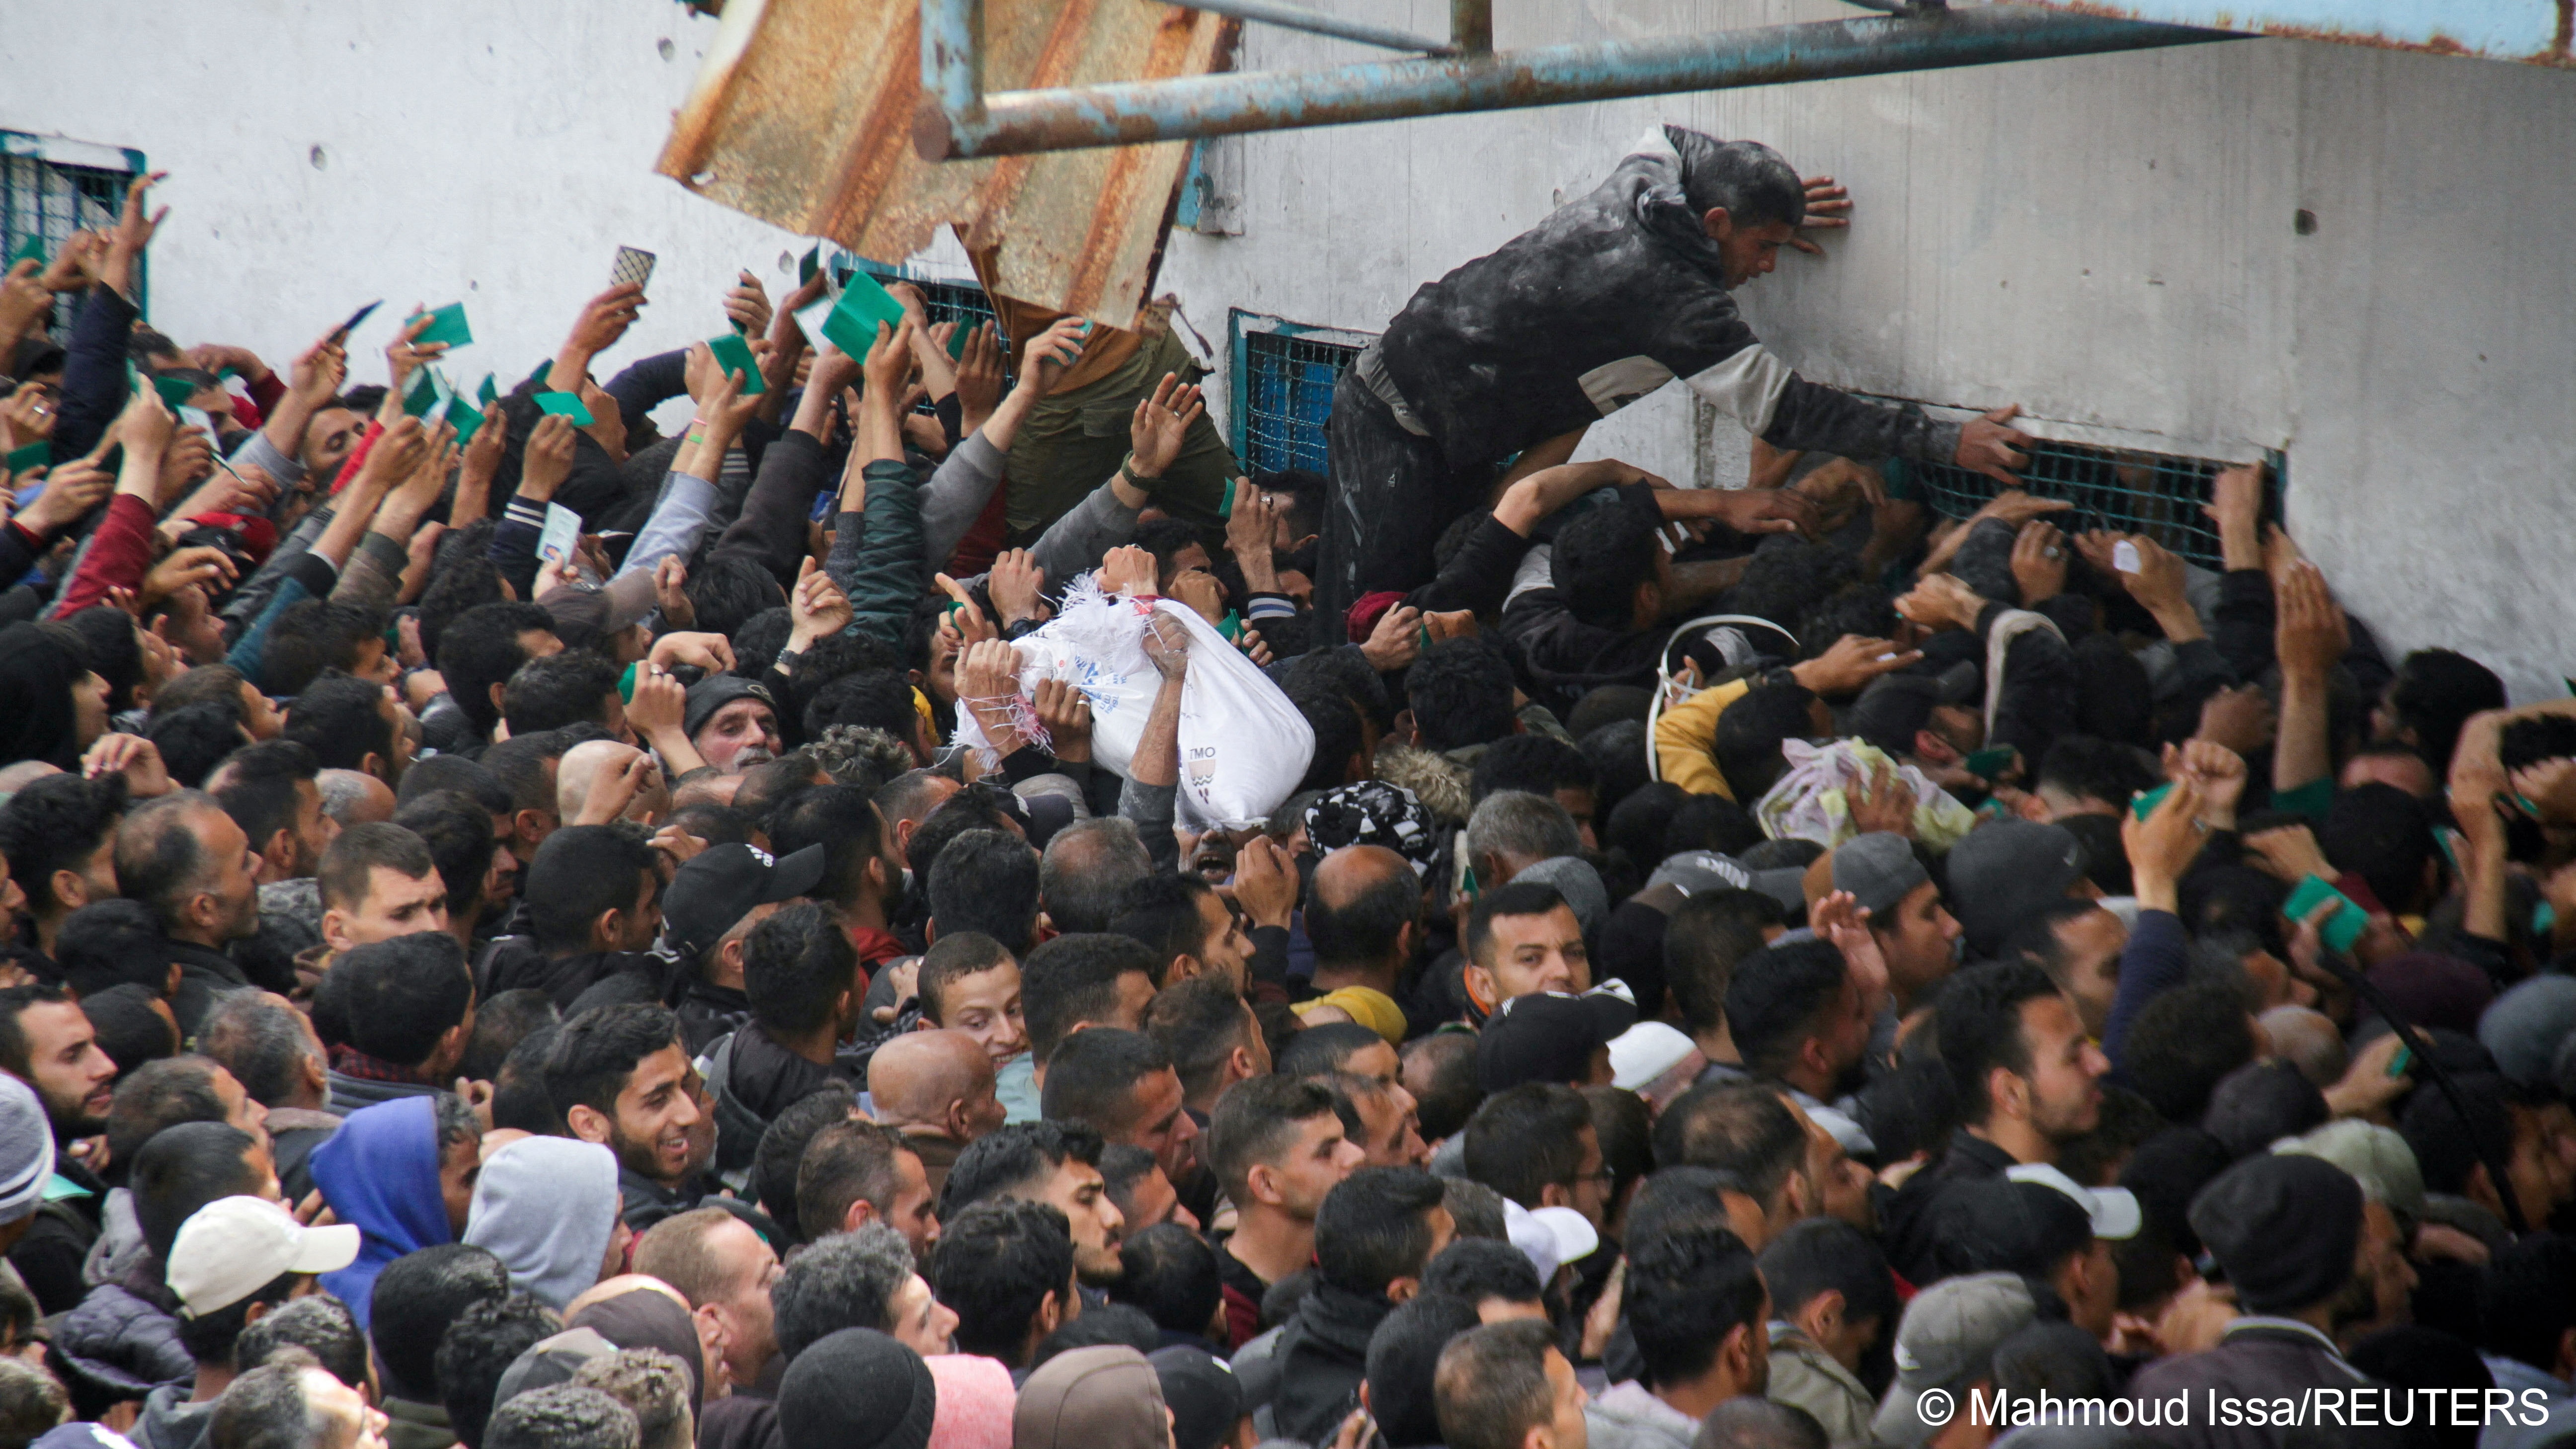 Palestinians, some holding green cards in the air, crowd around an UNRWA warehouse in Gaza waiting for aid